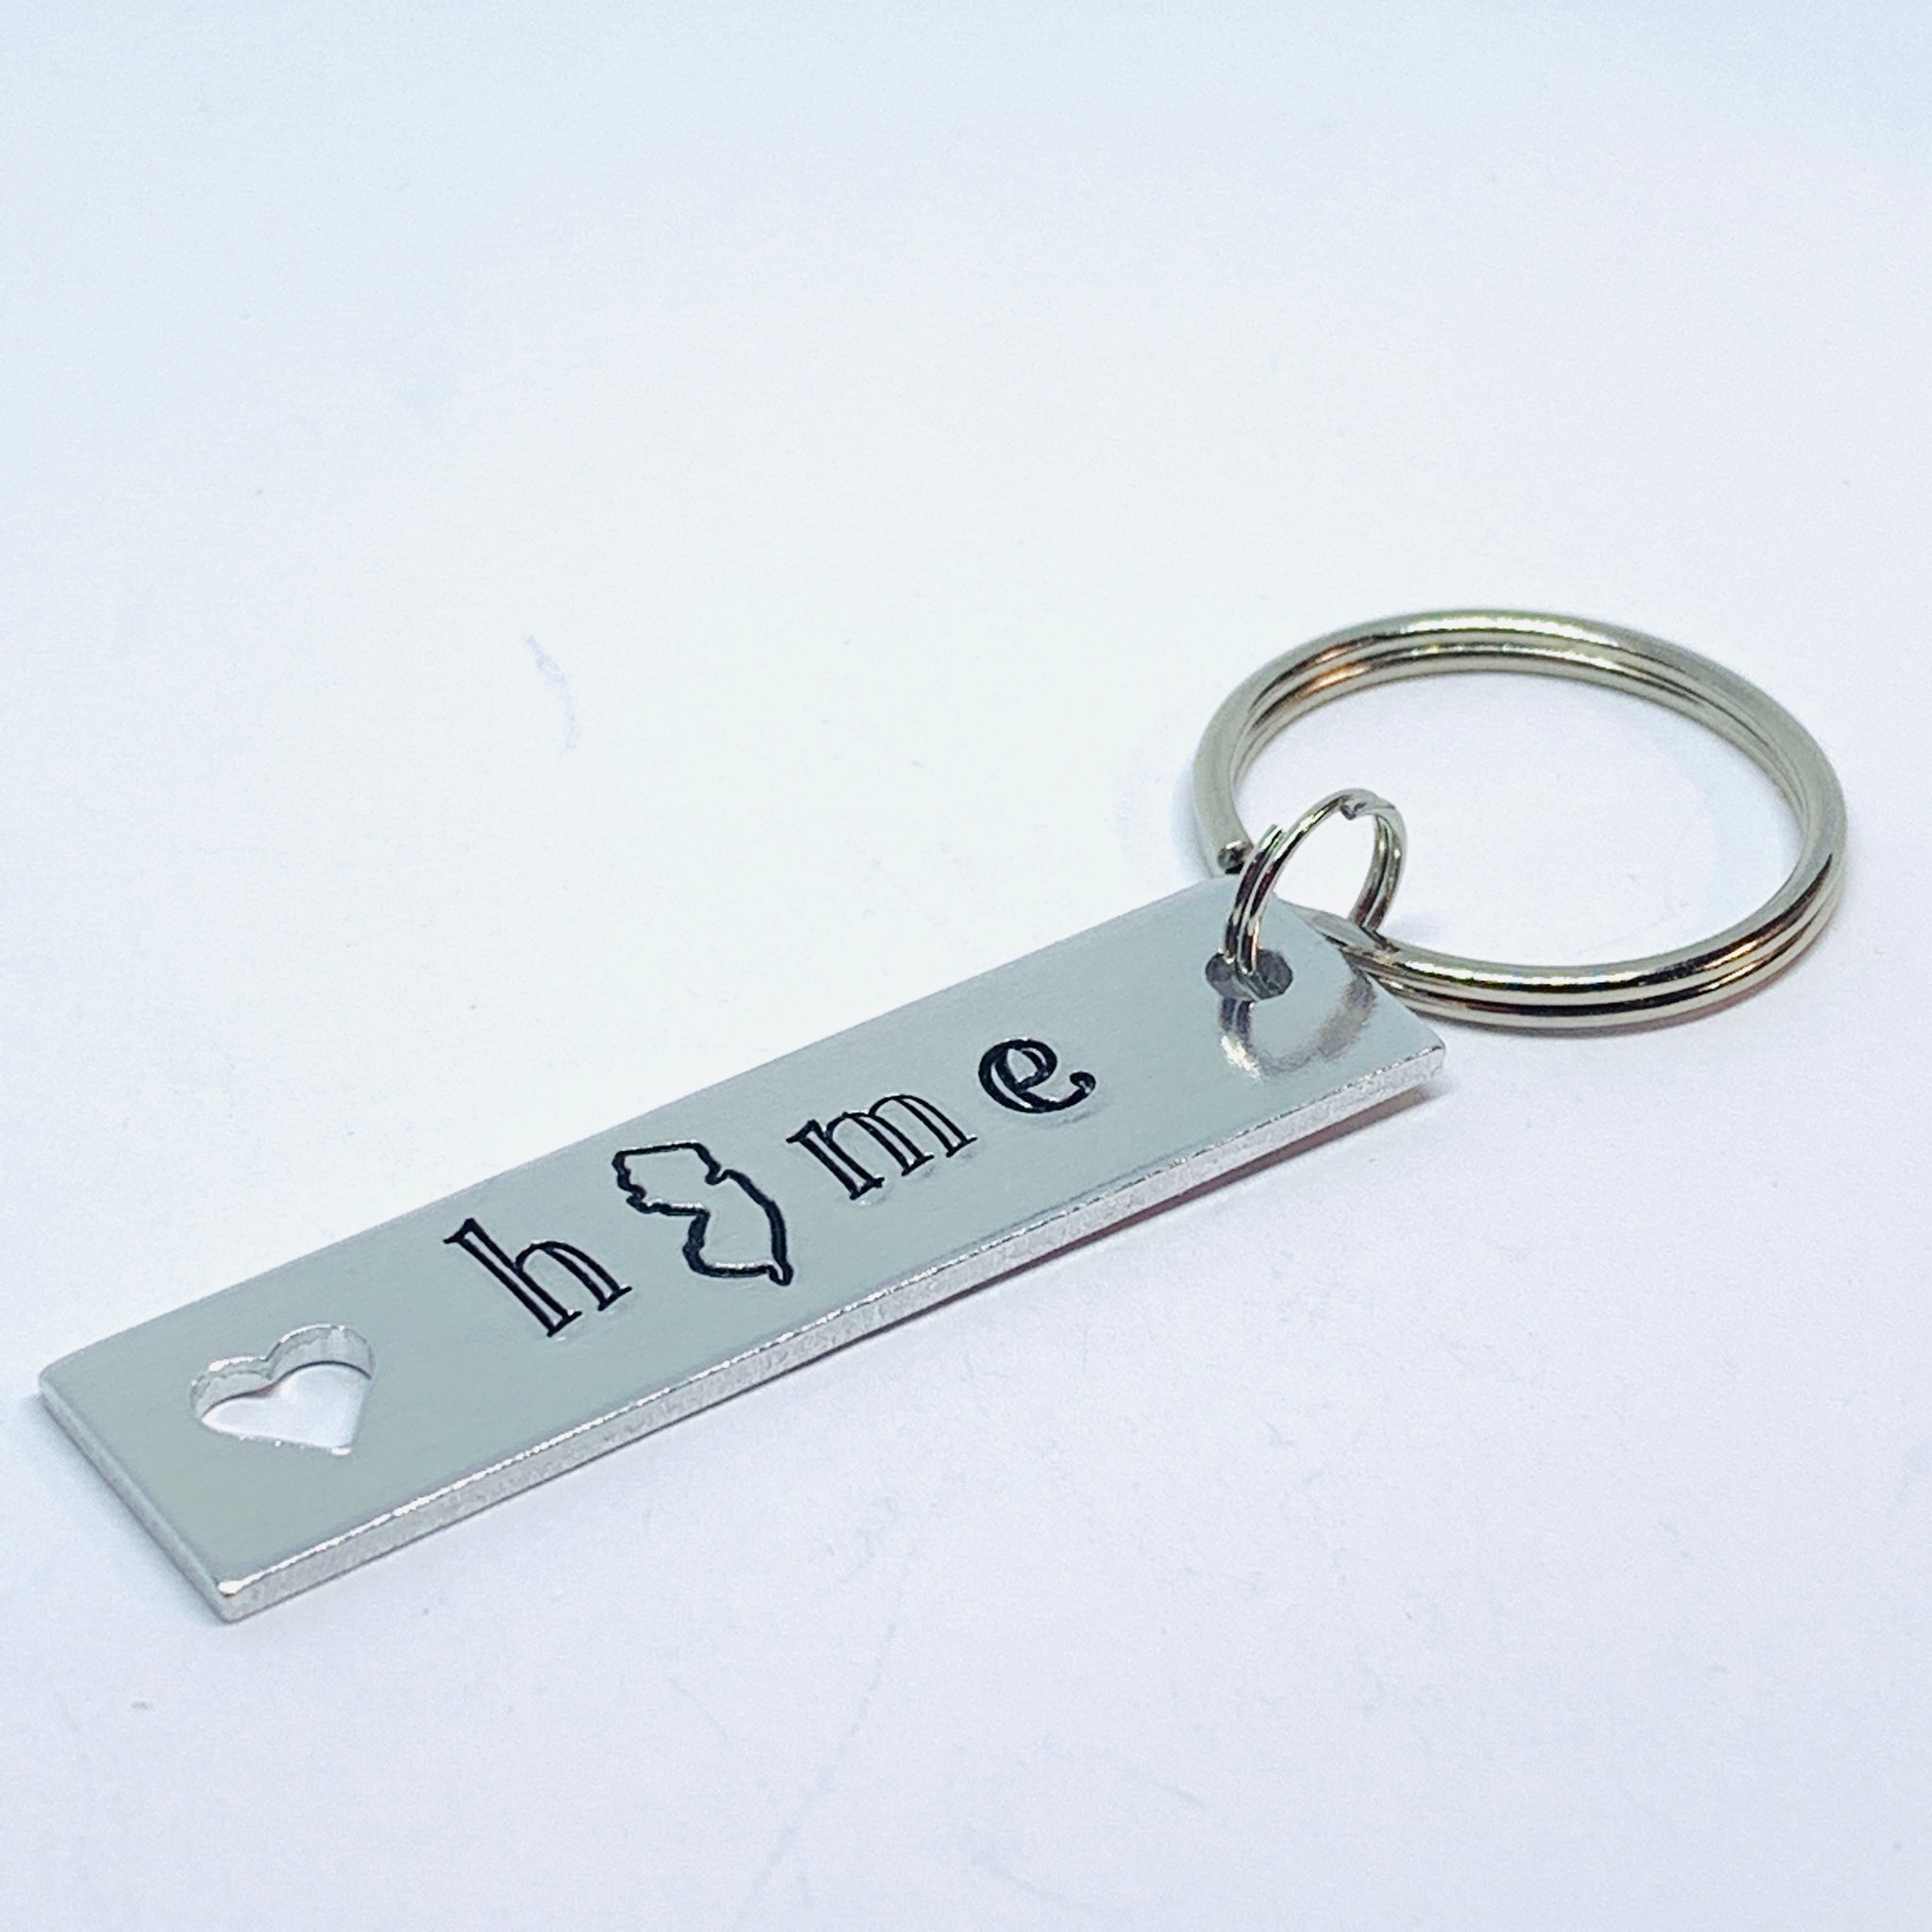 NJ Home - Hand Stamped Key Ring